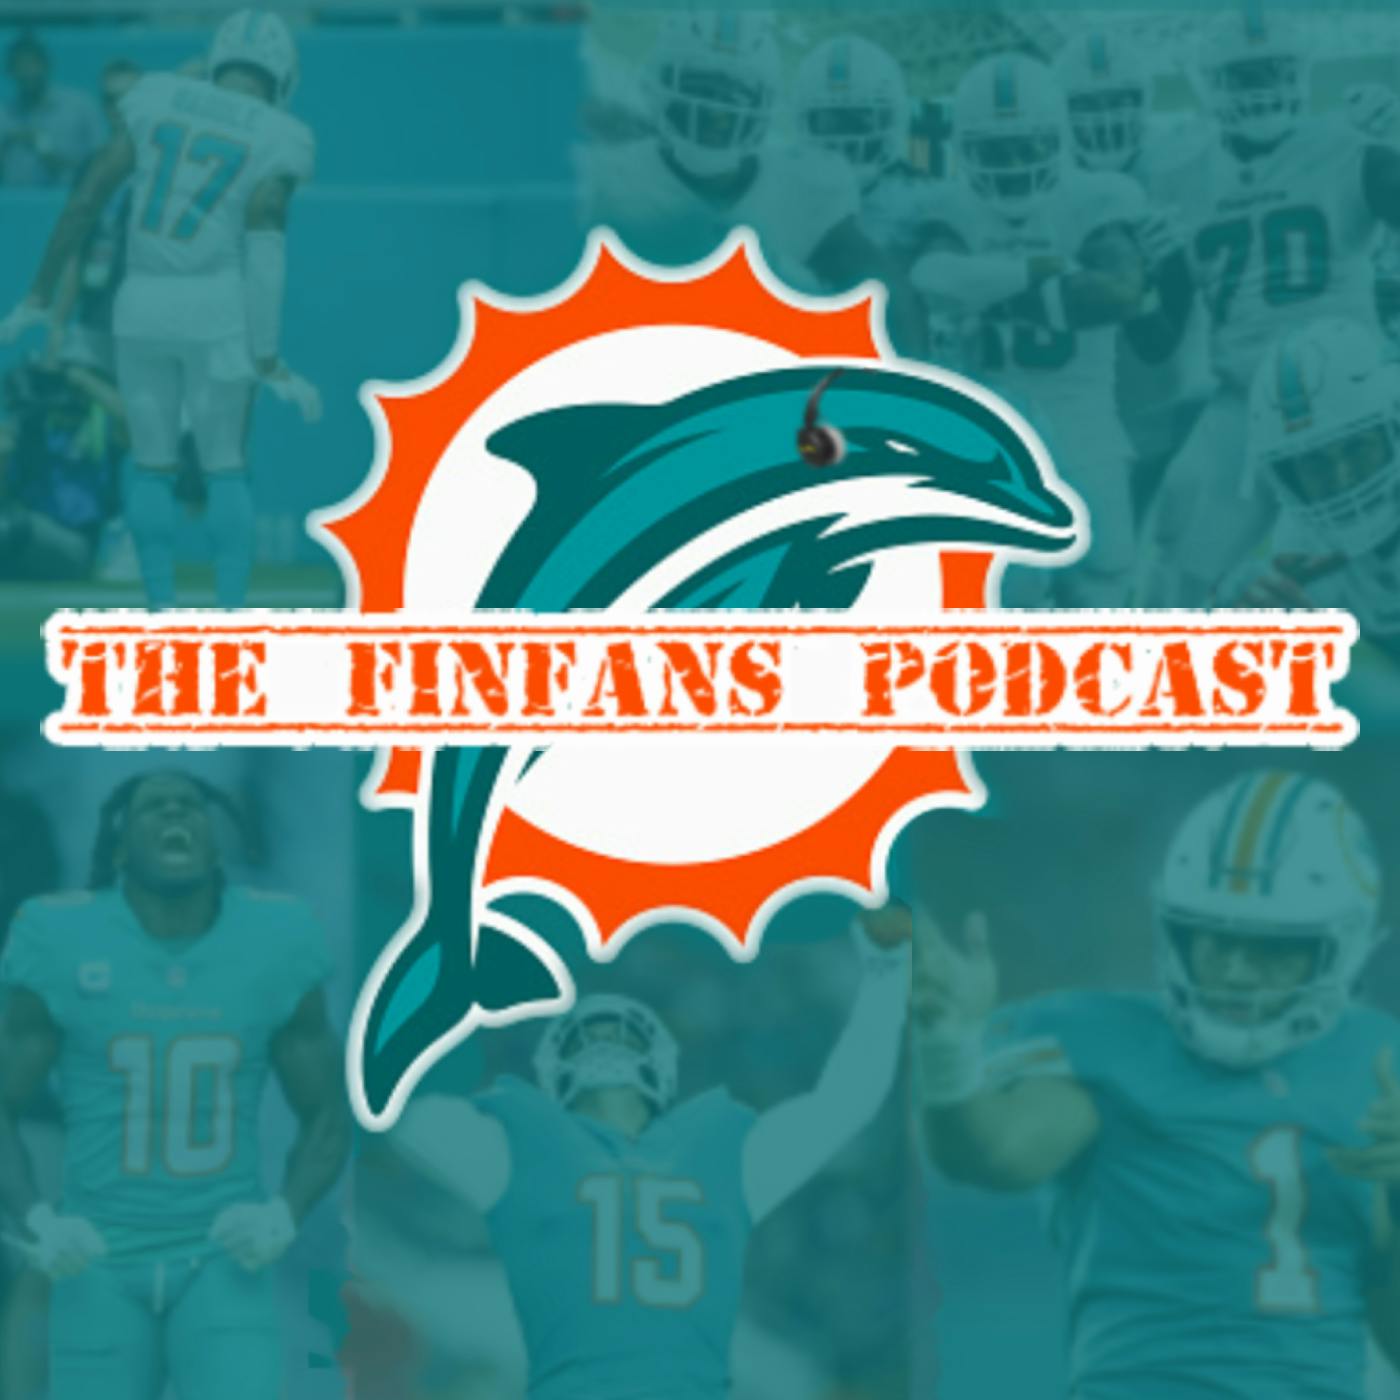 What Can the Dolphins Do to Improve?